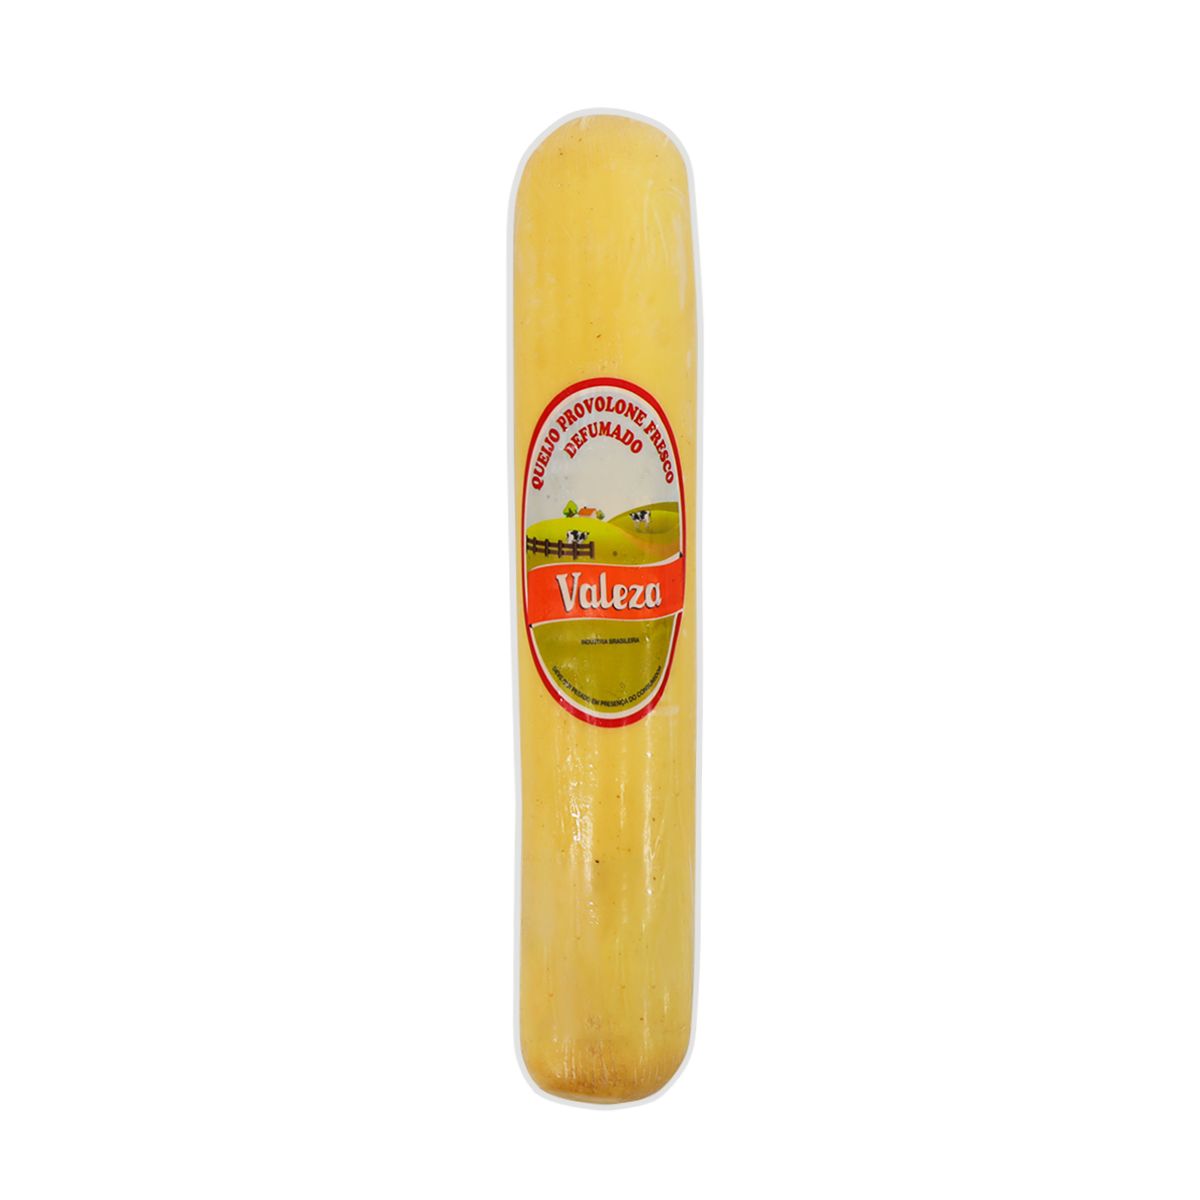 Queijo Valeza Provolone Salame 1 Unid. Aprox.360g image number 0